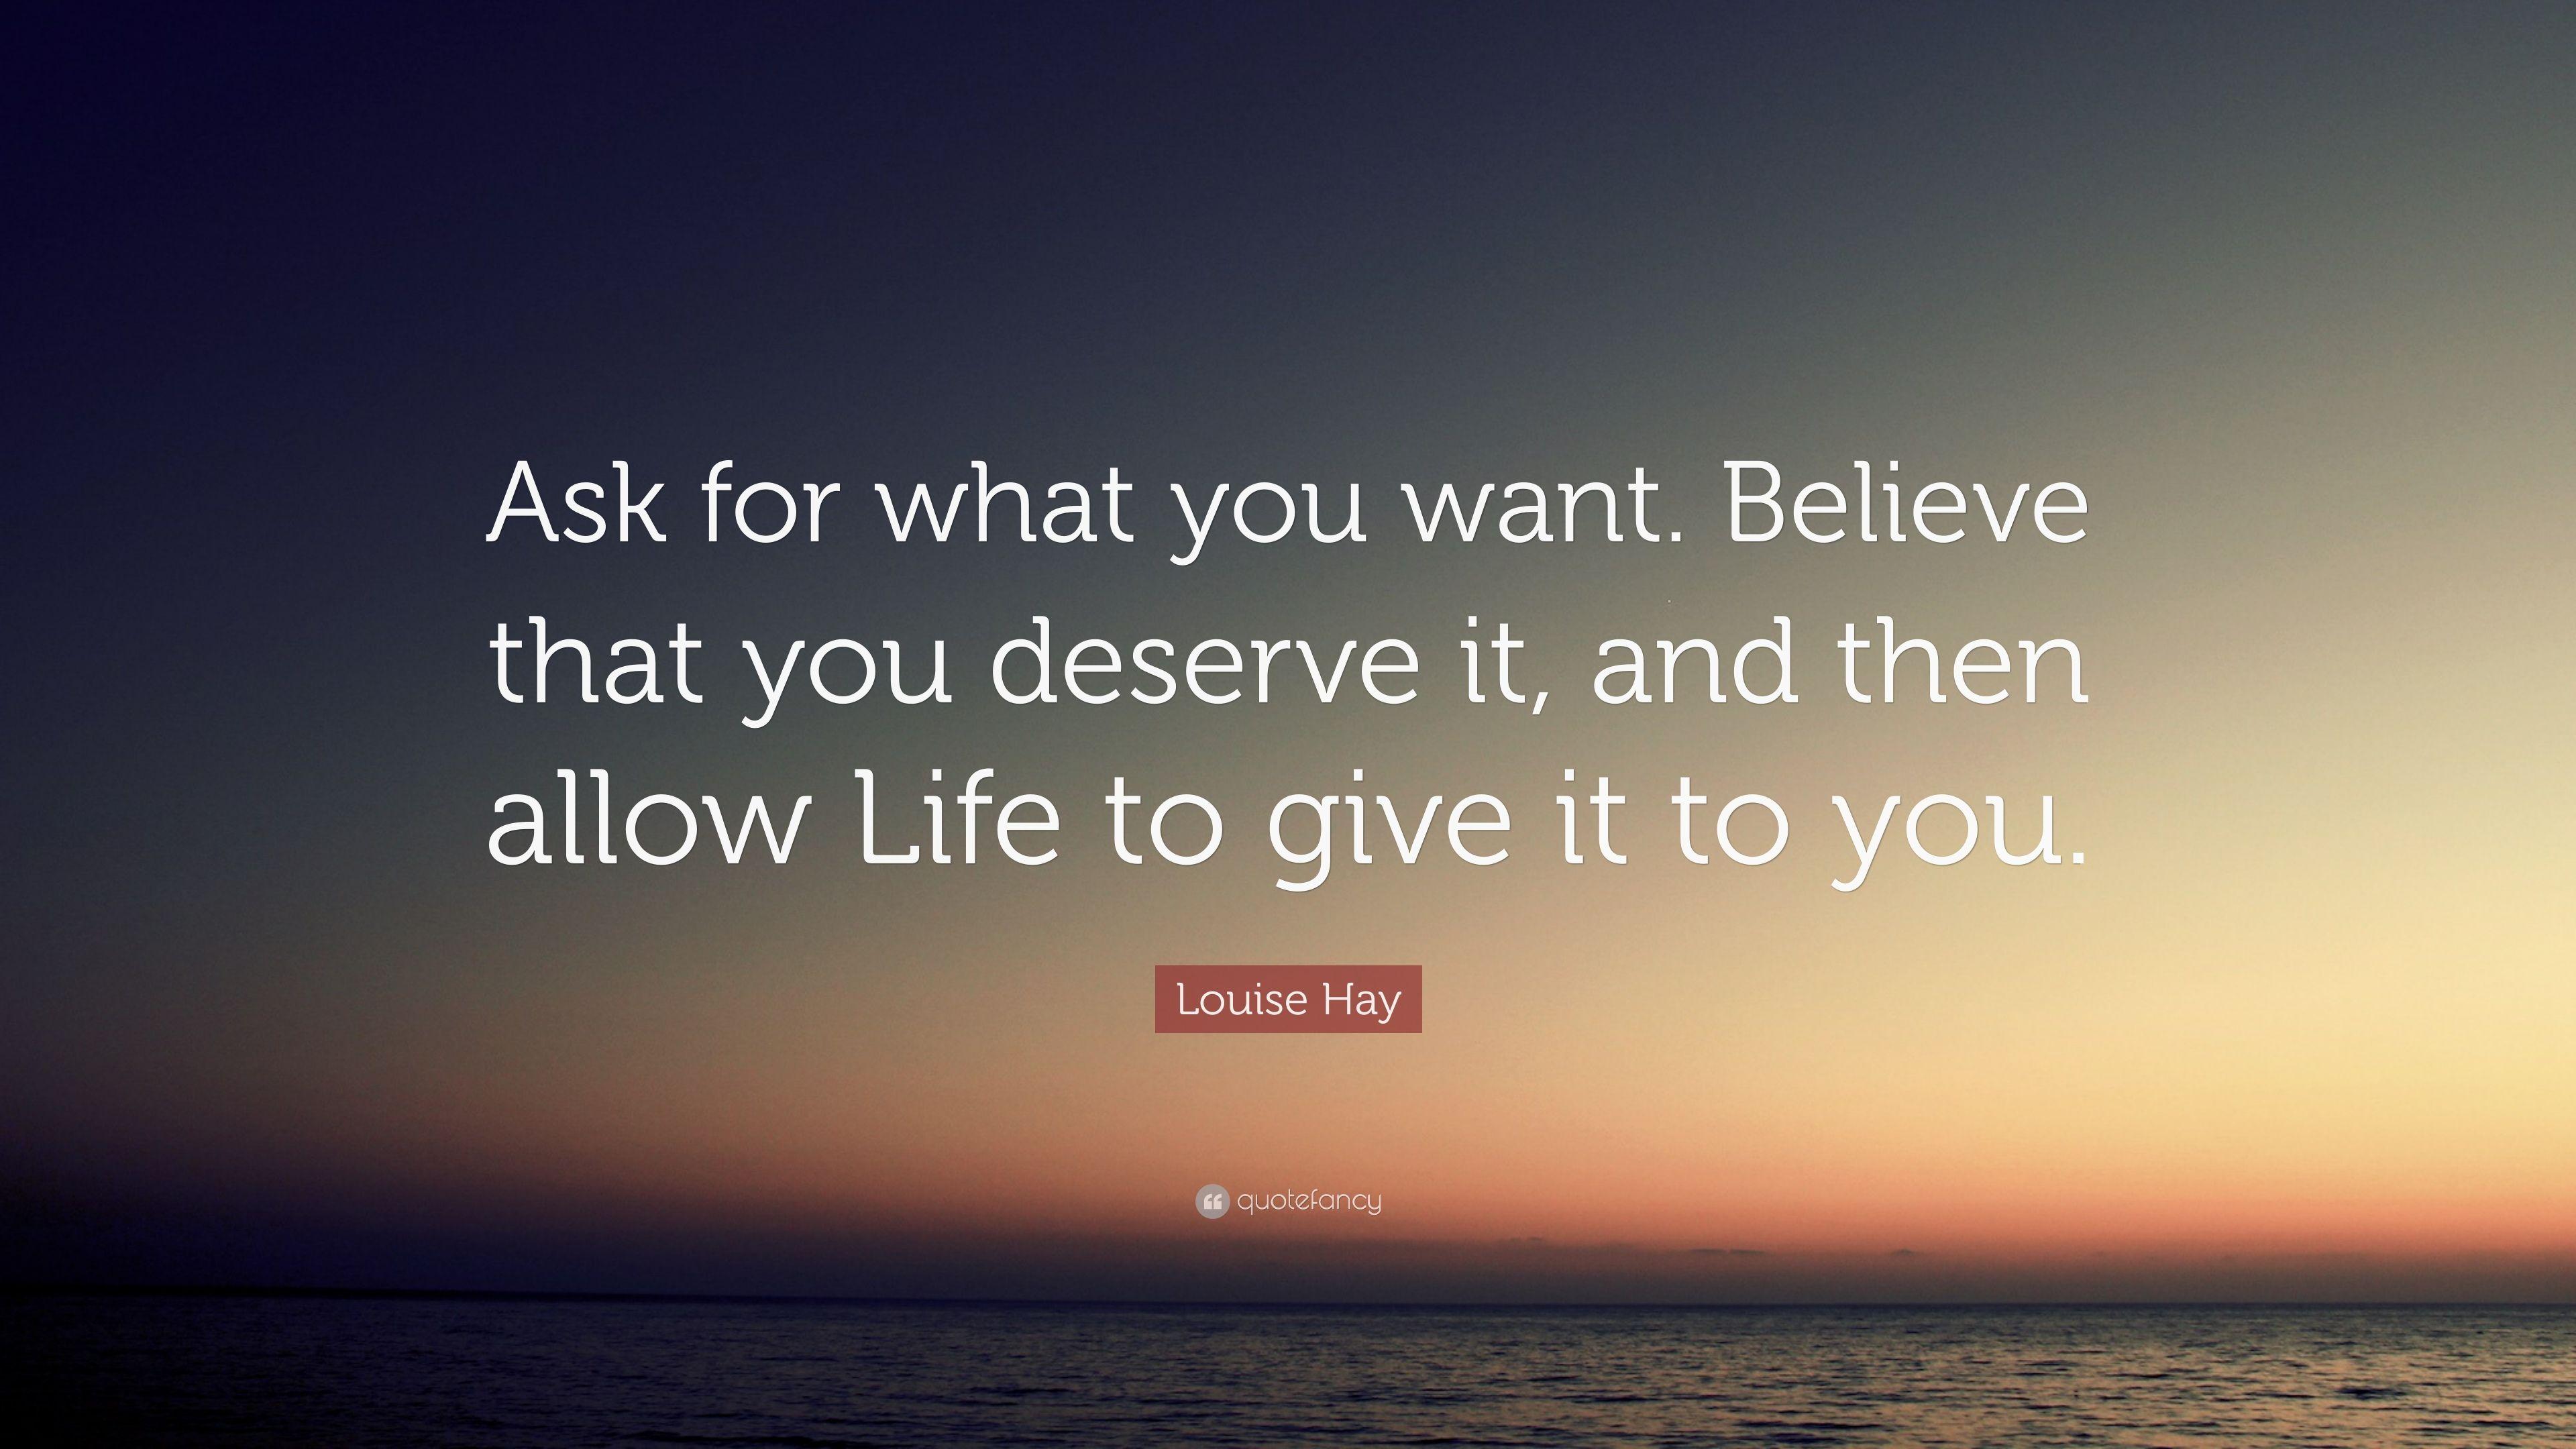 Louise Hay Quote: “Ask for what you want. Believe that you deserve